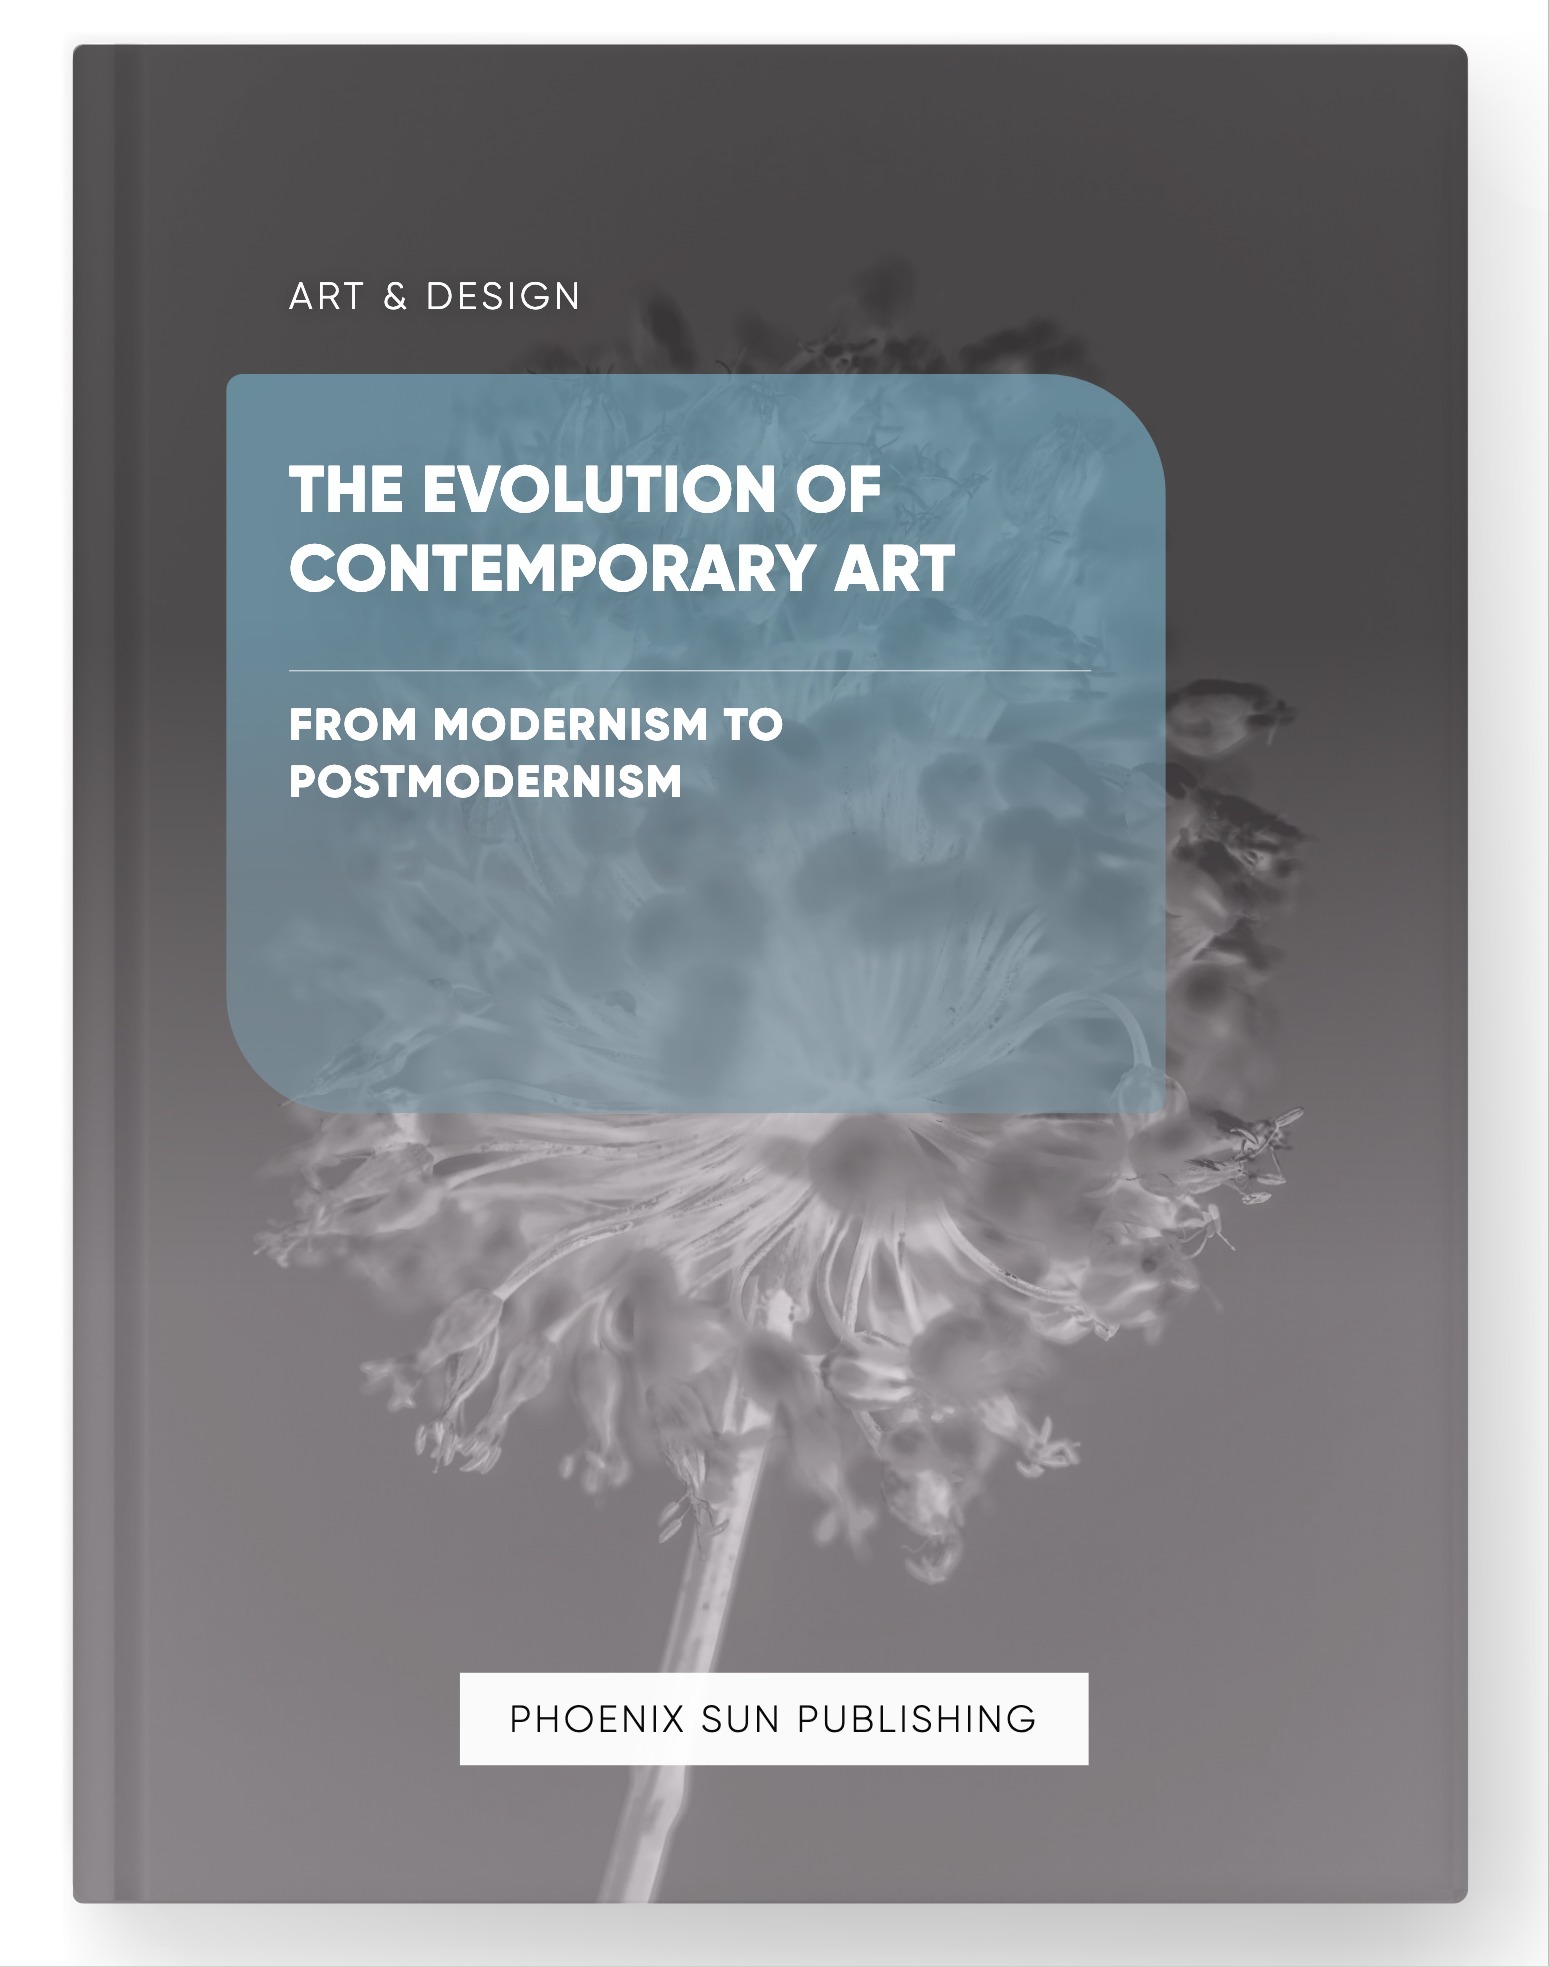 The Evolution of Contemporary Art – From Modernism to Postmodernism